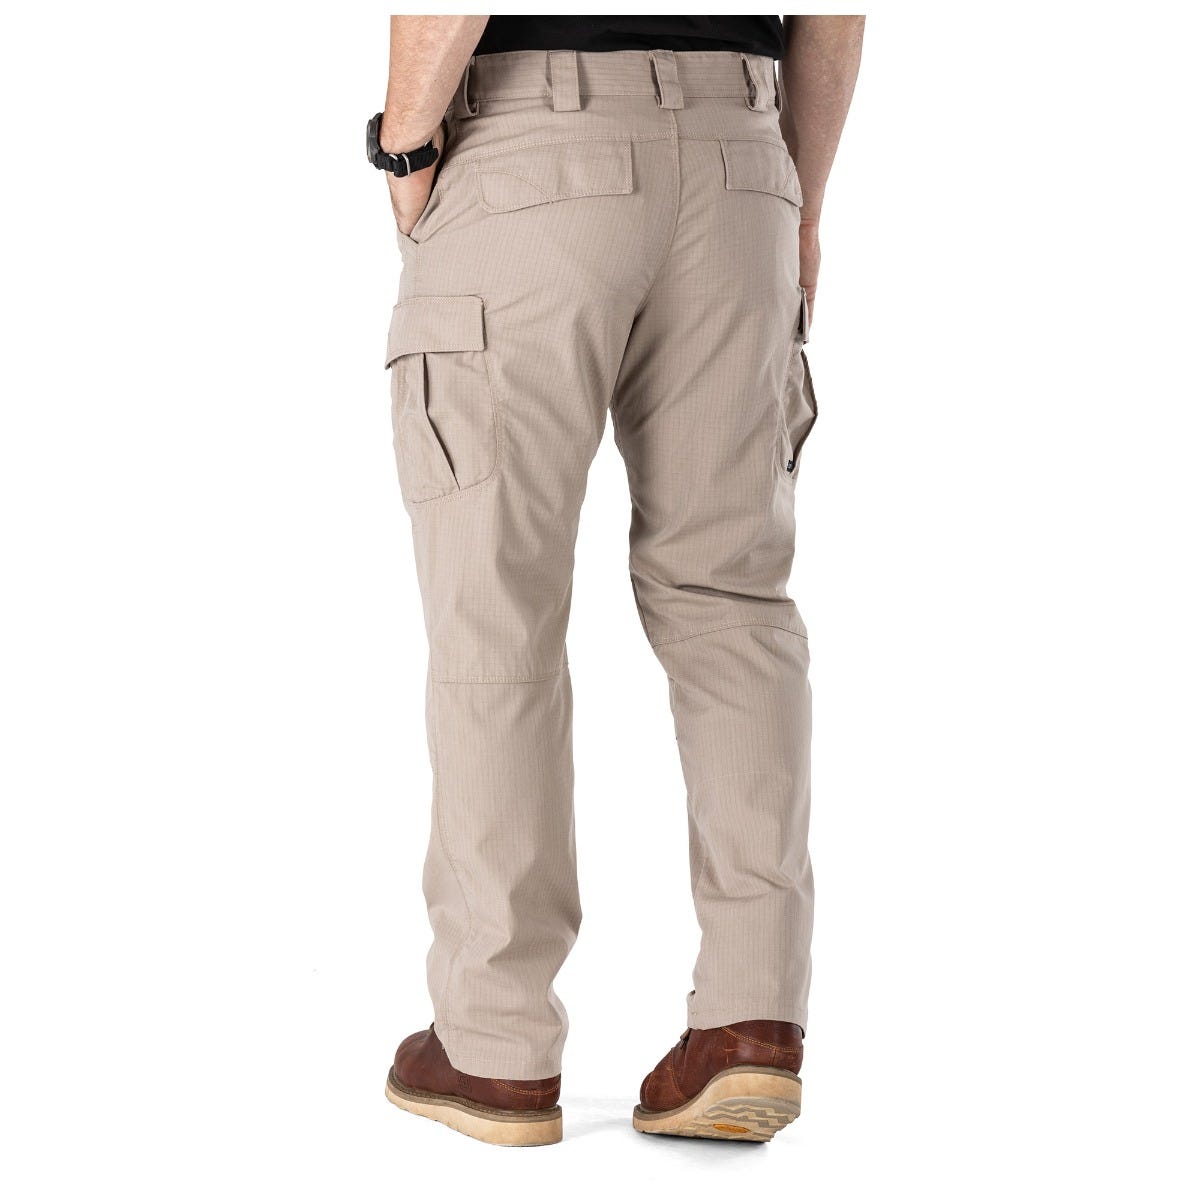 Tactical Gear Pockets Pant: 12 pockets for EDC and tactical essentials.